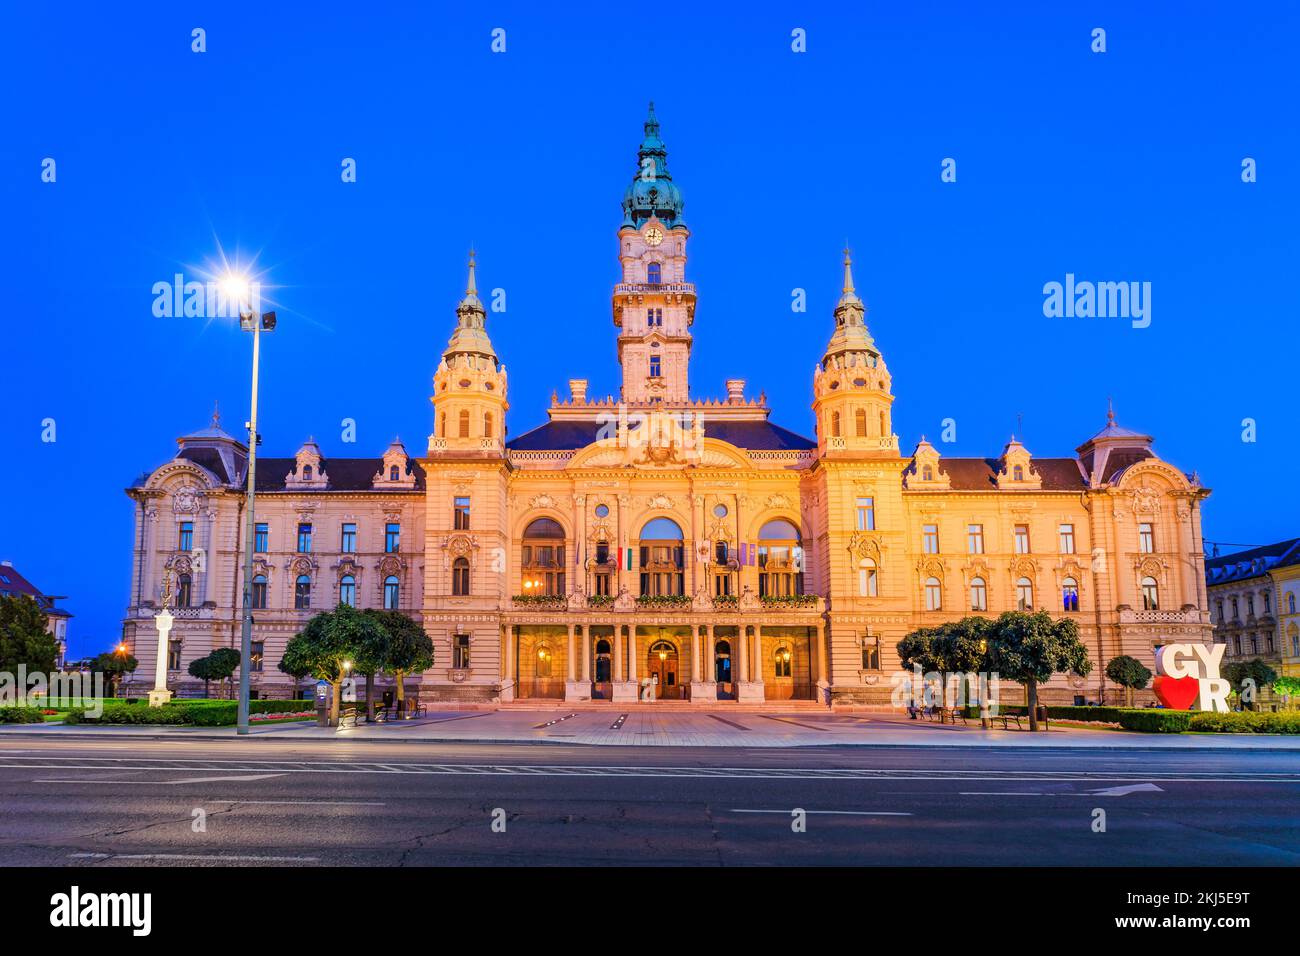 Gyor, Hungary - July 31, 2022: View of the town hall at night. Stock Photo